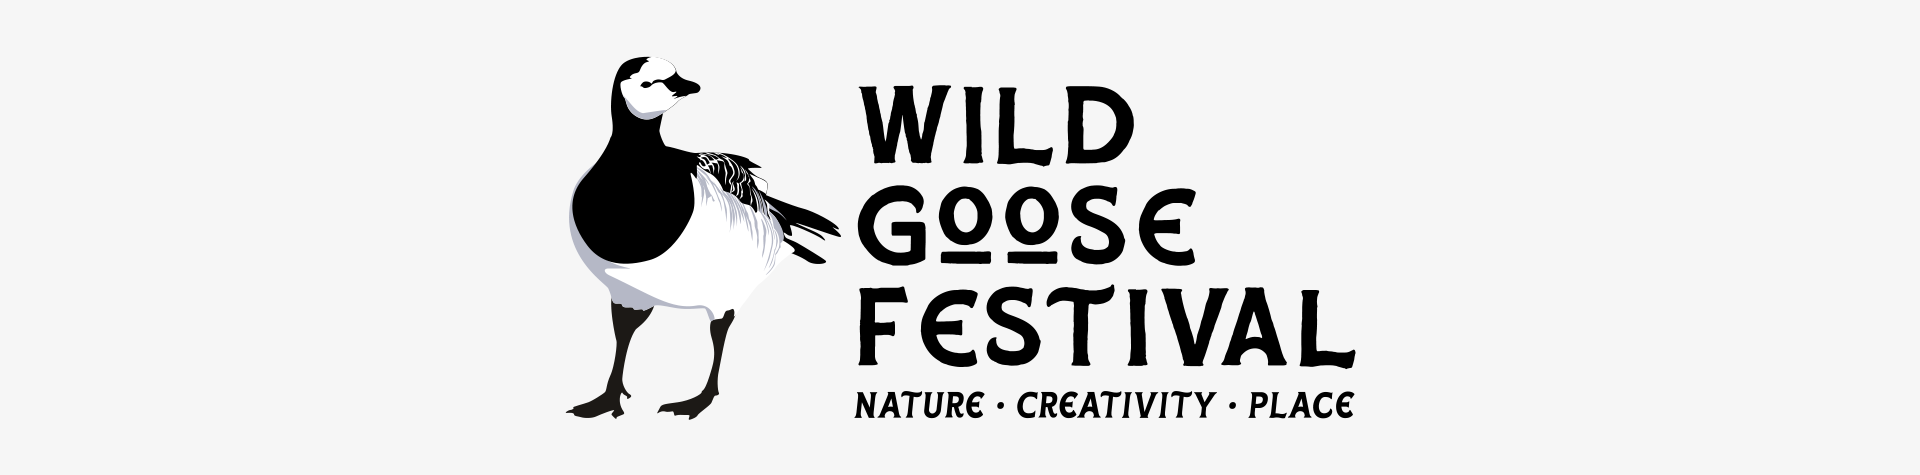 Graphic poster for the 'Wild Goose Festival'.